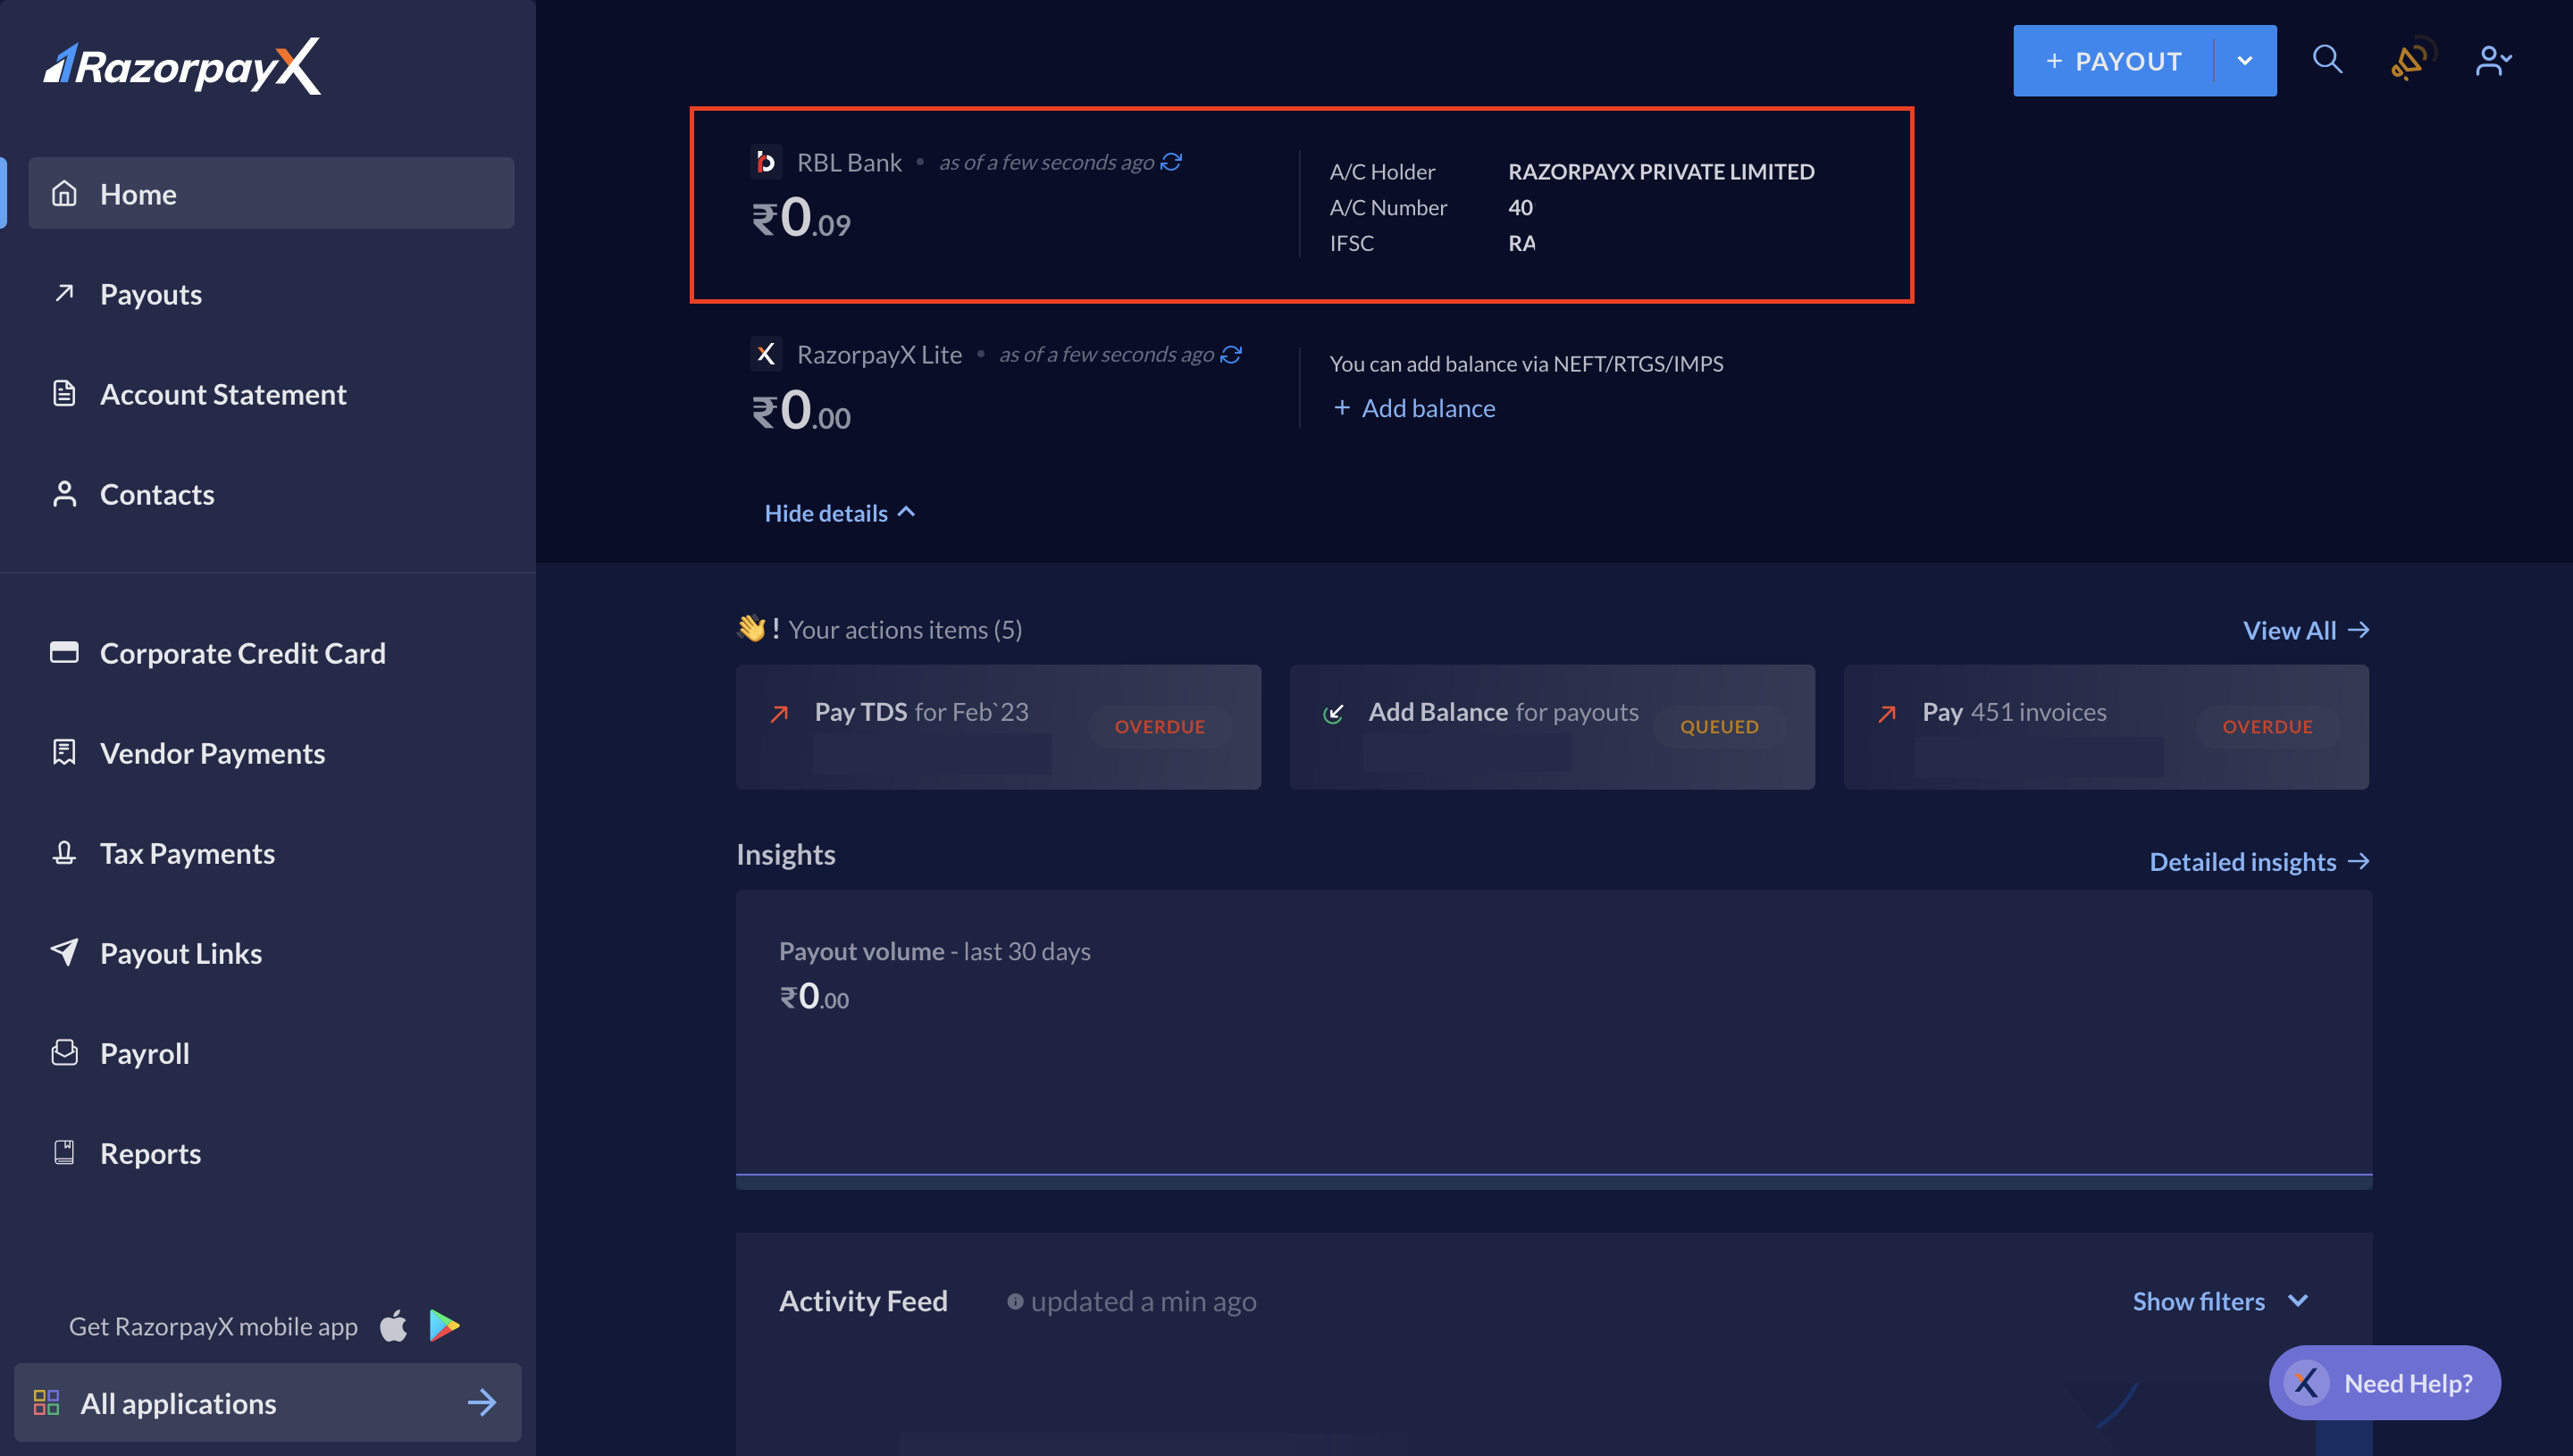 RazorpayX Account Dashboard after Activation